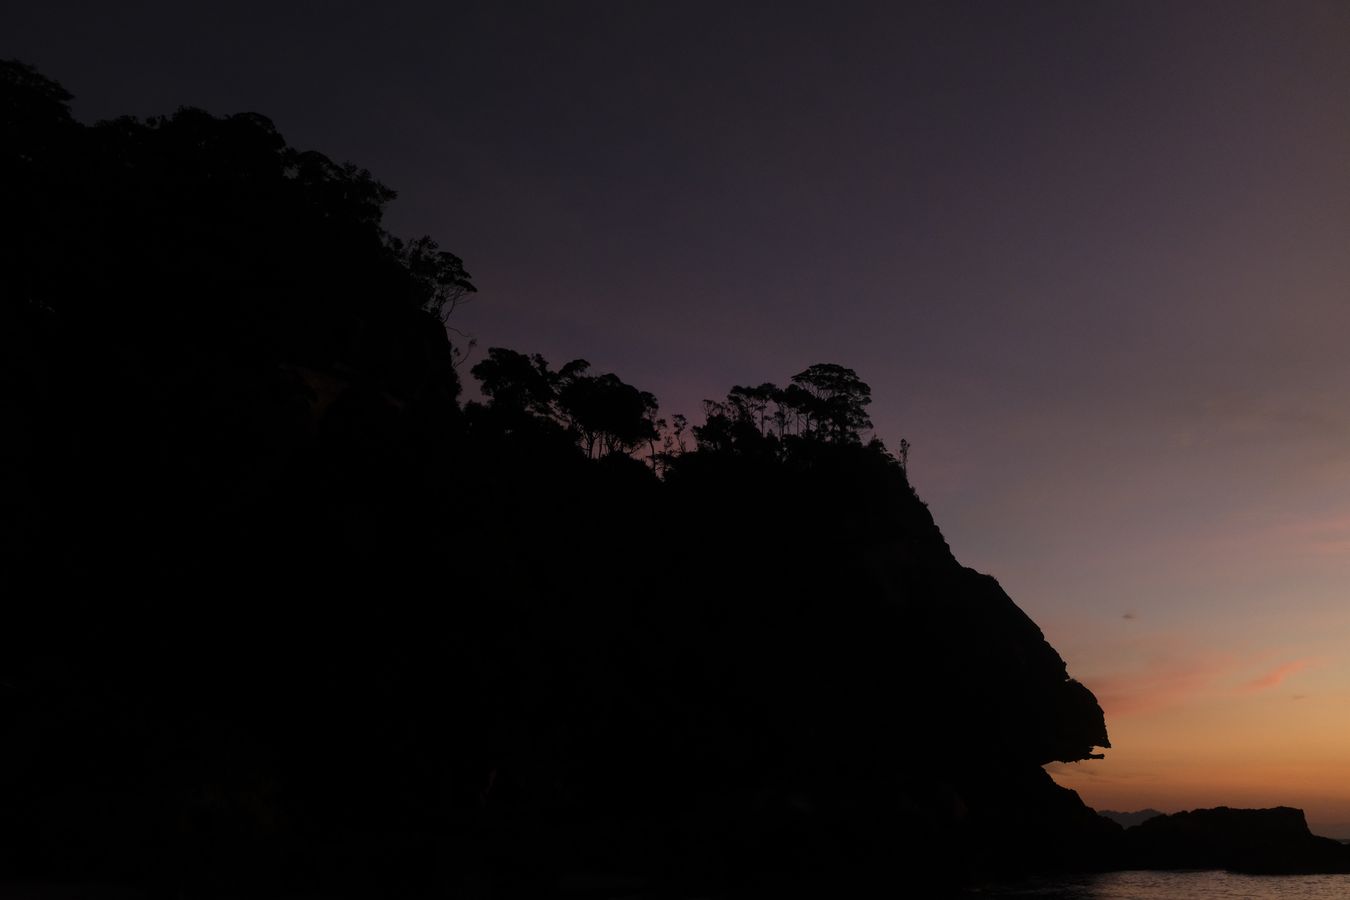 Cliff Vegetation and Sunset View